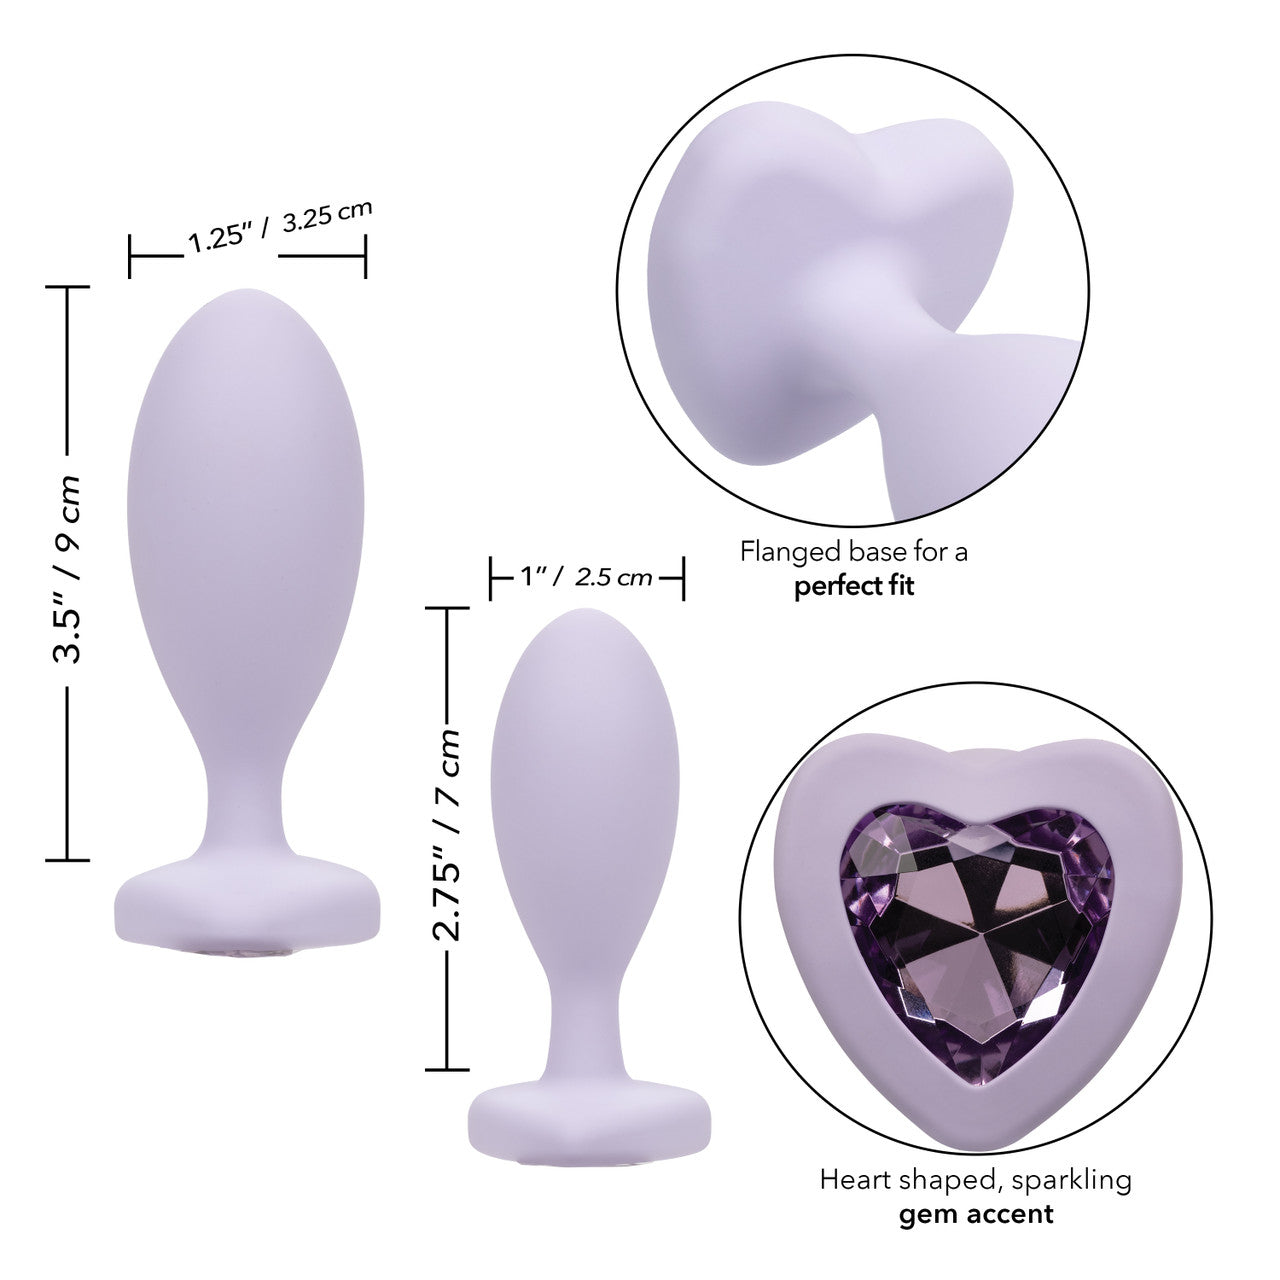 diagram showing dimensions and close ups of the heart shaped gem and flanged base.